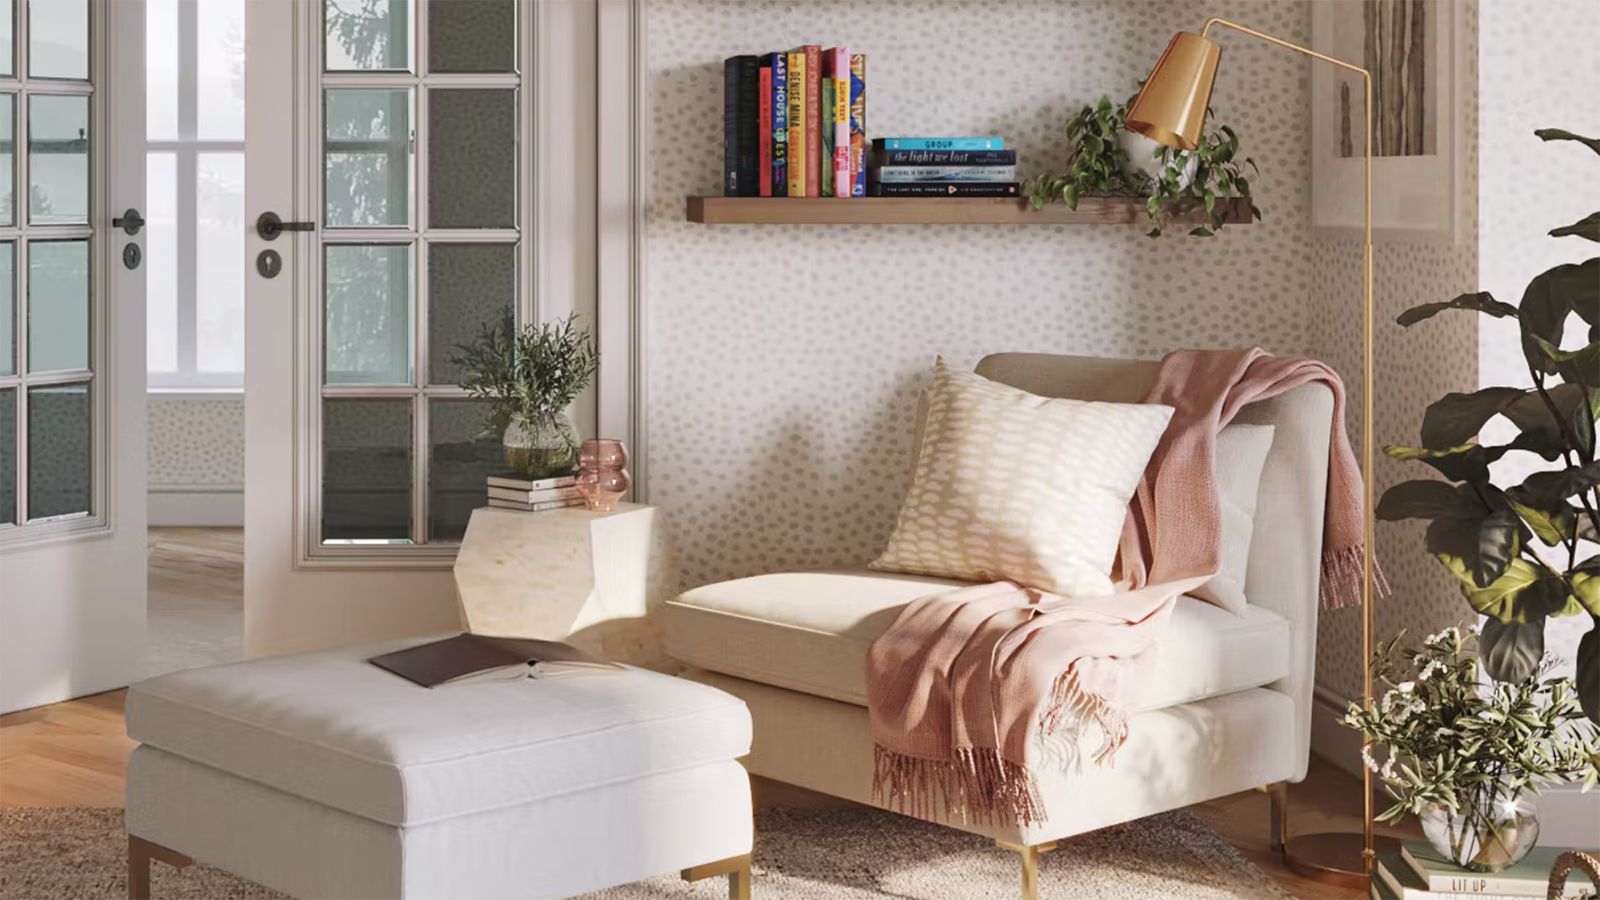 Havenly and Reese’s Book Club just launched a cozy collection of furniture for book lovers | CNN Underscored